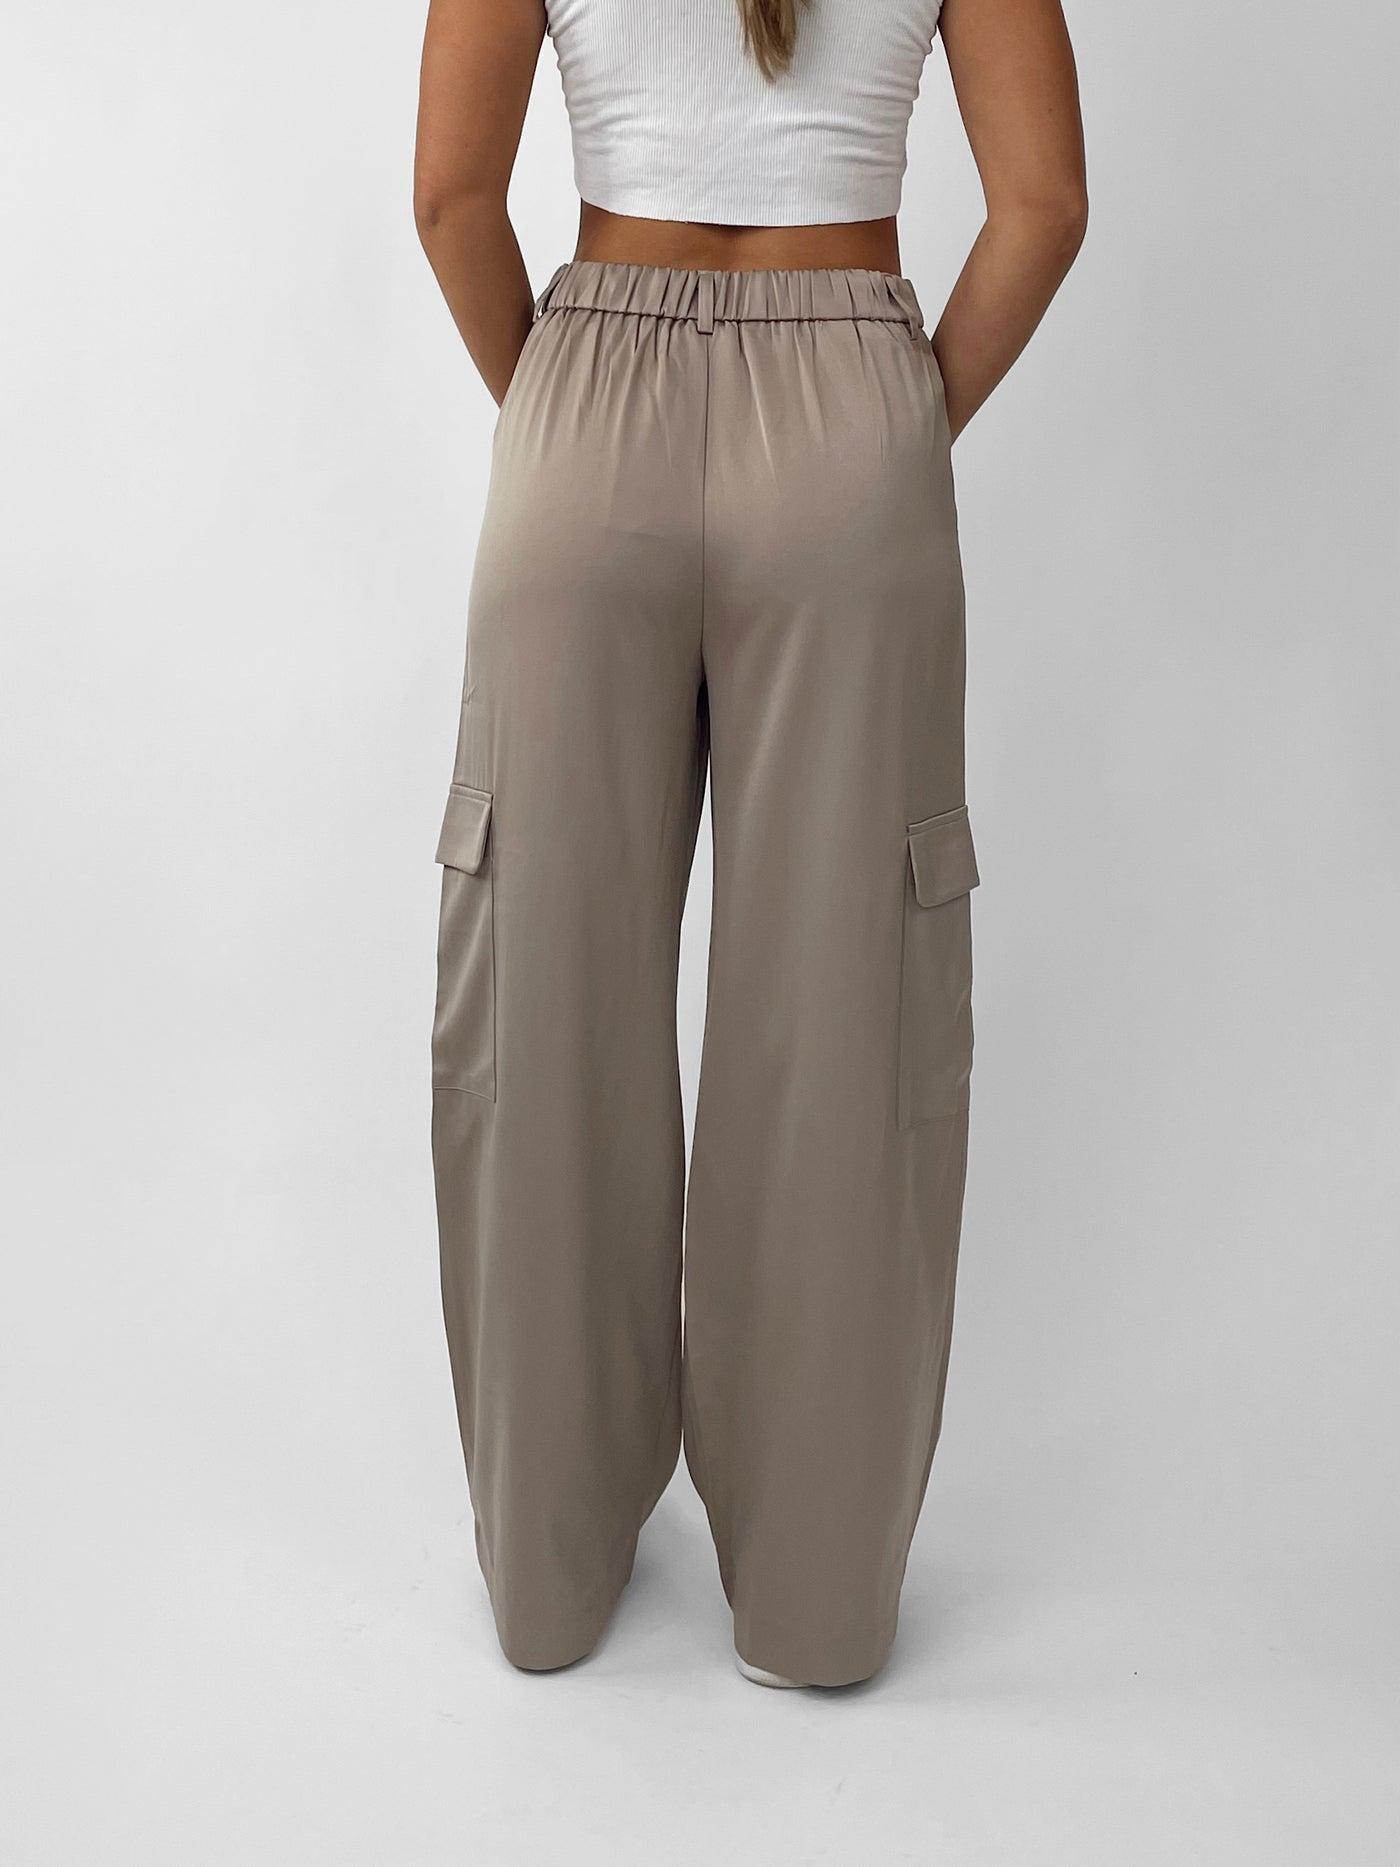 After Hours Cargo Pants